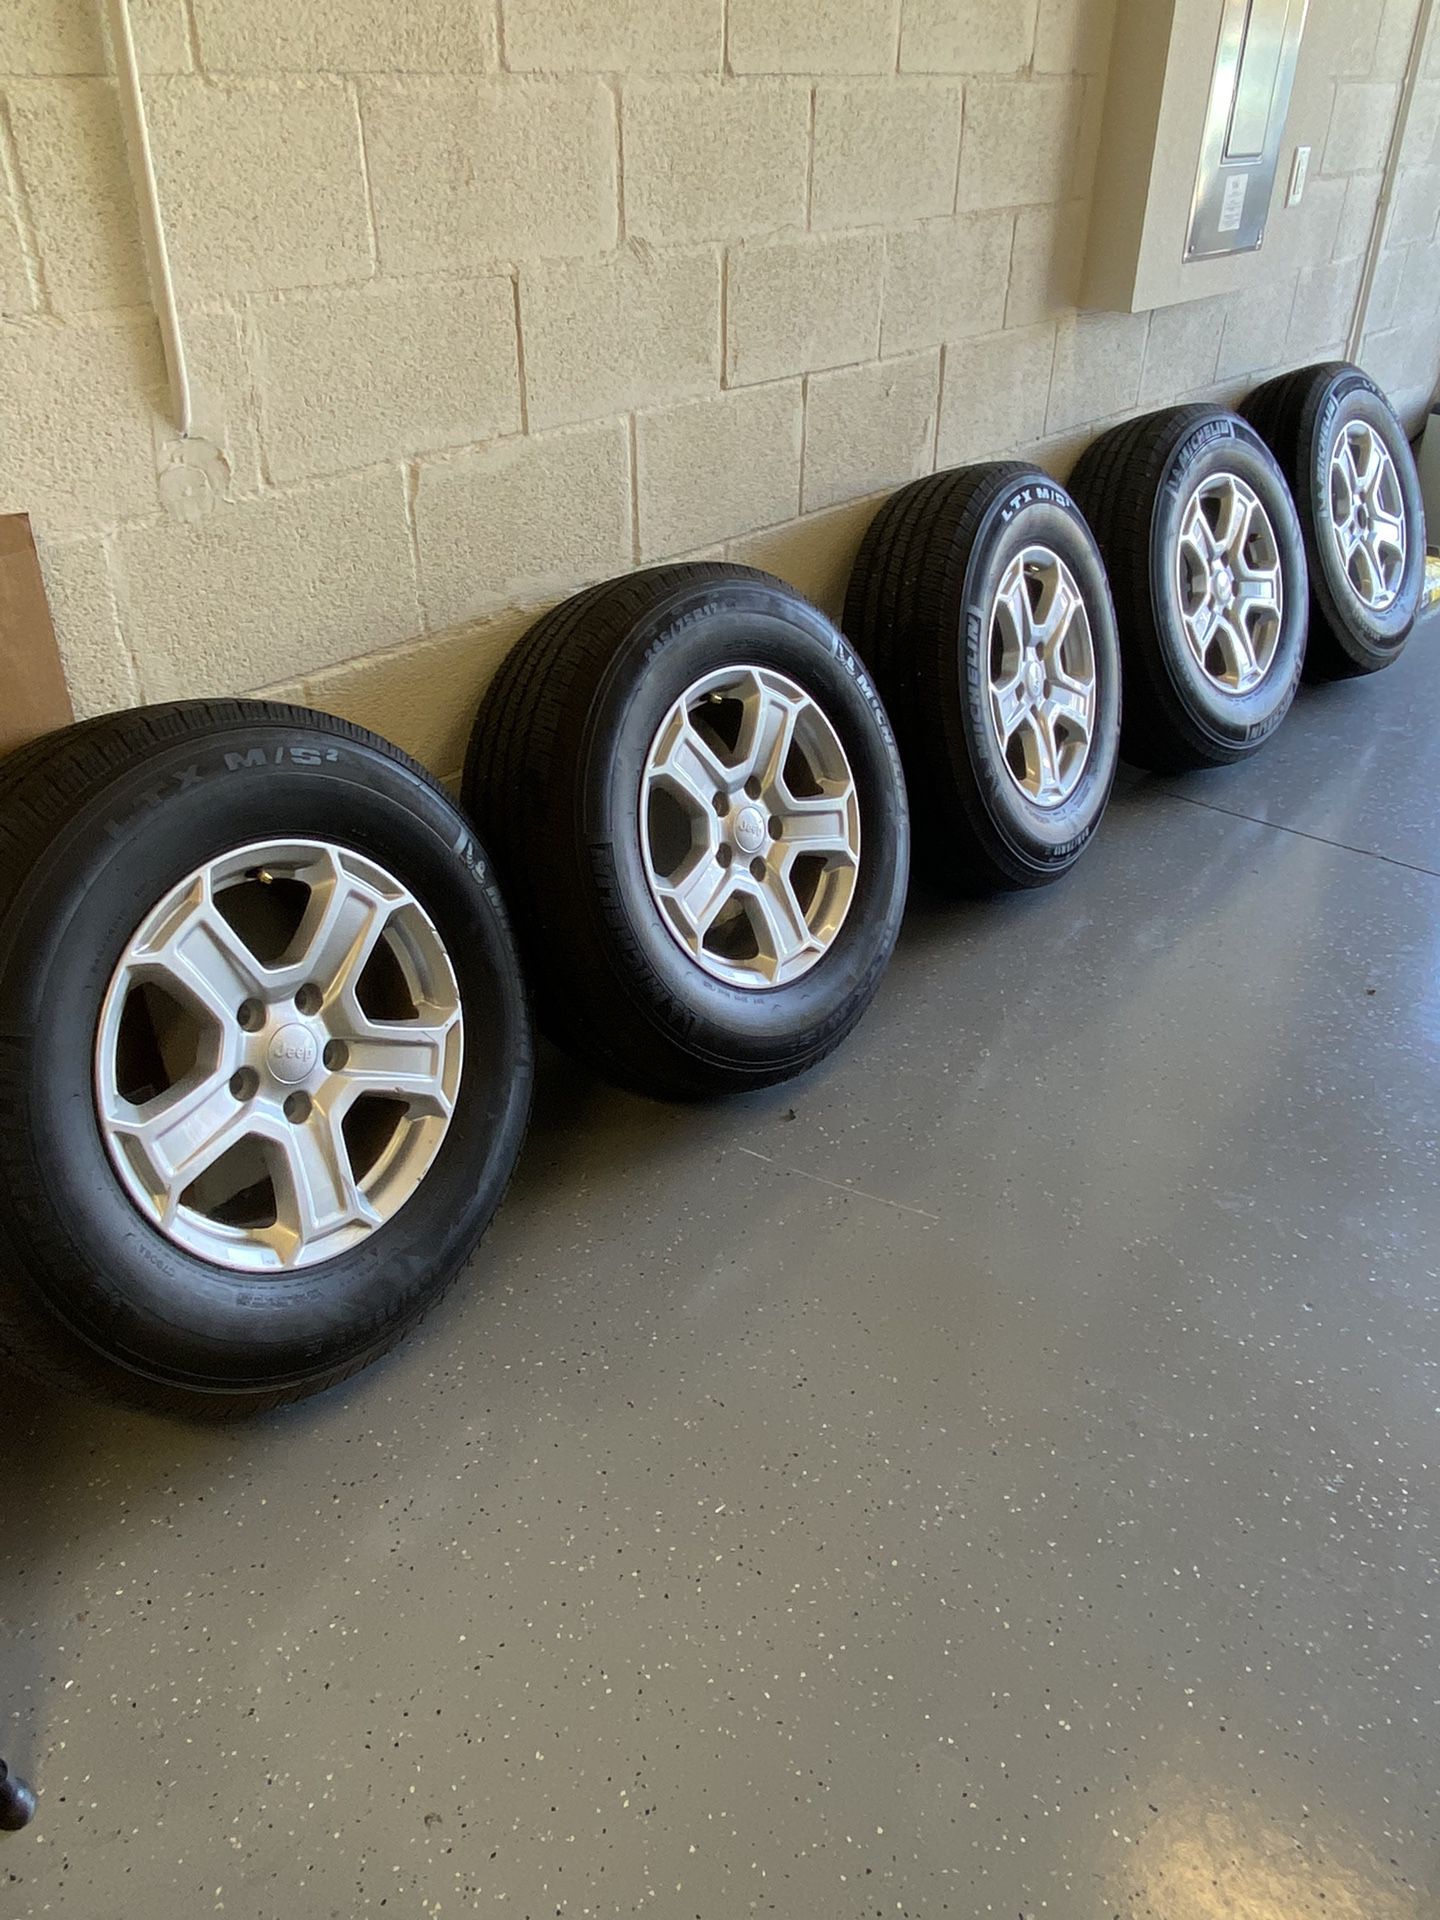 5 Tires & Wheels From 2019 Jeep Wrangler Sport